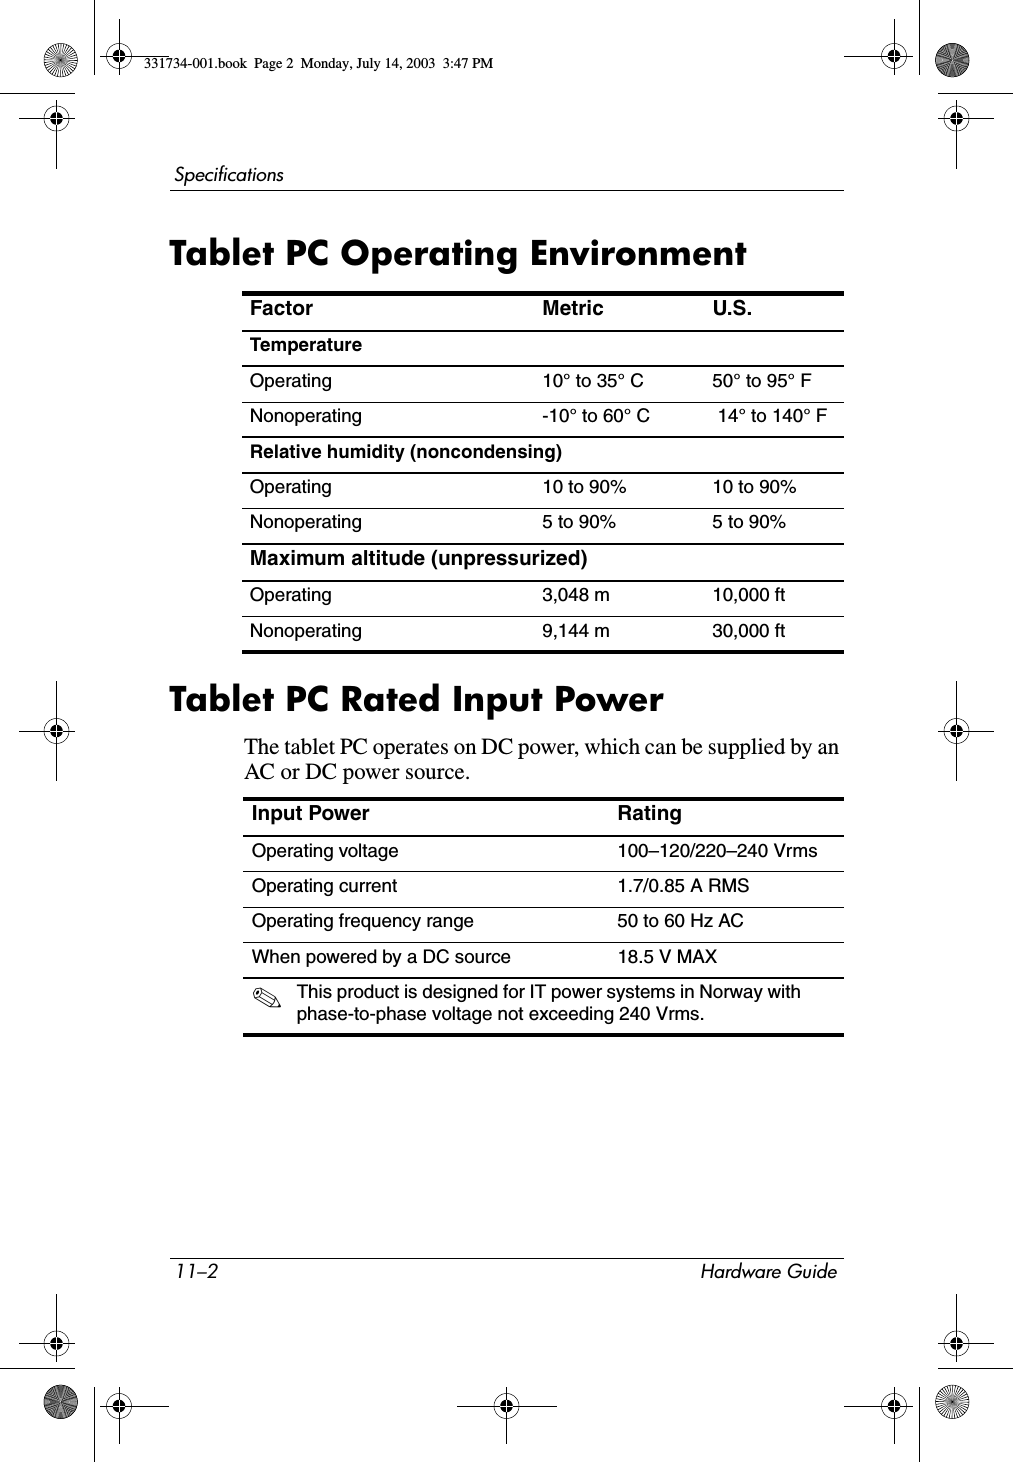 11–2 Hardware GuideSpecificationsTablet PC Operating EnvironmentTablet PC Rated Input PowerThe tablet PC operates on DC power, which can be supplied by an AC or DC power source.Factor Metric U.S.TemperatureOperating 10° to 35° C 50° to 95° FNonoperating -10° to 60° C  14° to 140° FRelative humidity (noncondensing)Operating 10 to 90% 10 to 90%Nonoperating 5 to 90% 5 to 90%Maximum altitude (unpressurized)Operating 3,048 m 10,000 ftNonoperating 9,144 m 30,000 ftInput Power RatingOperating voltage 100–120/220–240 VrmsOperating current 1.7/0.85 A RMSOperating frequency range 50 to 60 Hz ACWhen powered by a DC source 18.5 V MAX✎This product is designed for IT power systems in Norway with phase-to-phase voltage not exceeding 240 Vrms.331734-001.book  Page 2  Monday, July 14, 2003  3:47 PM